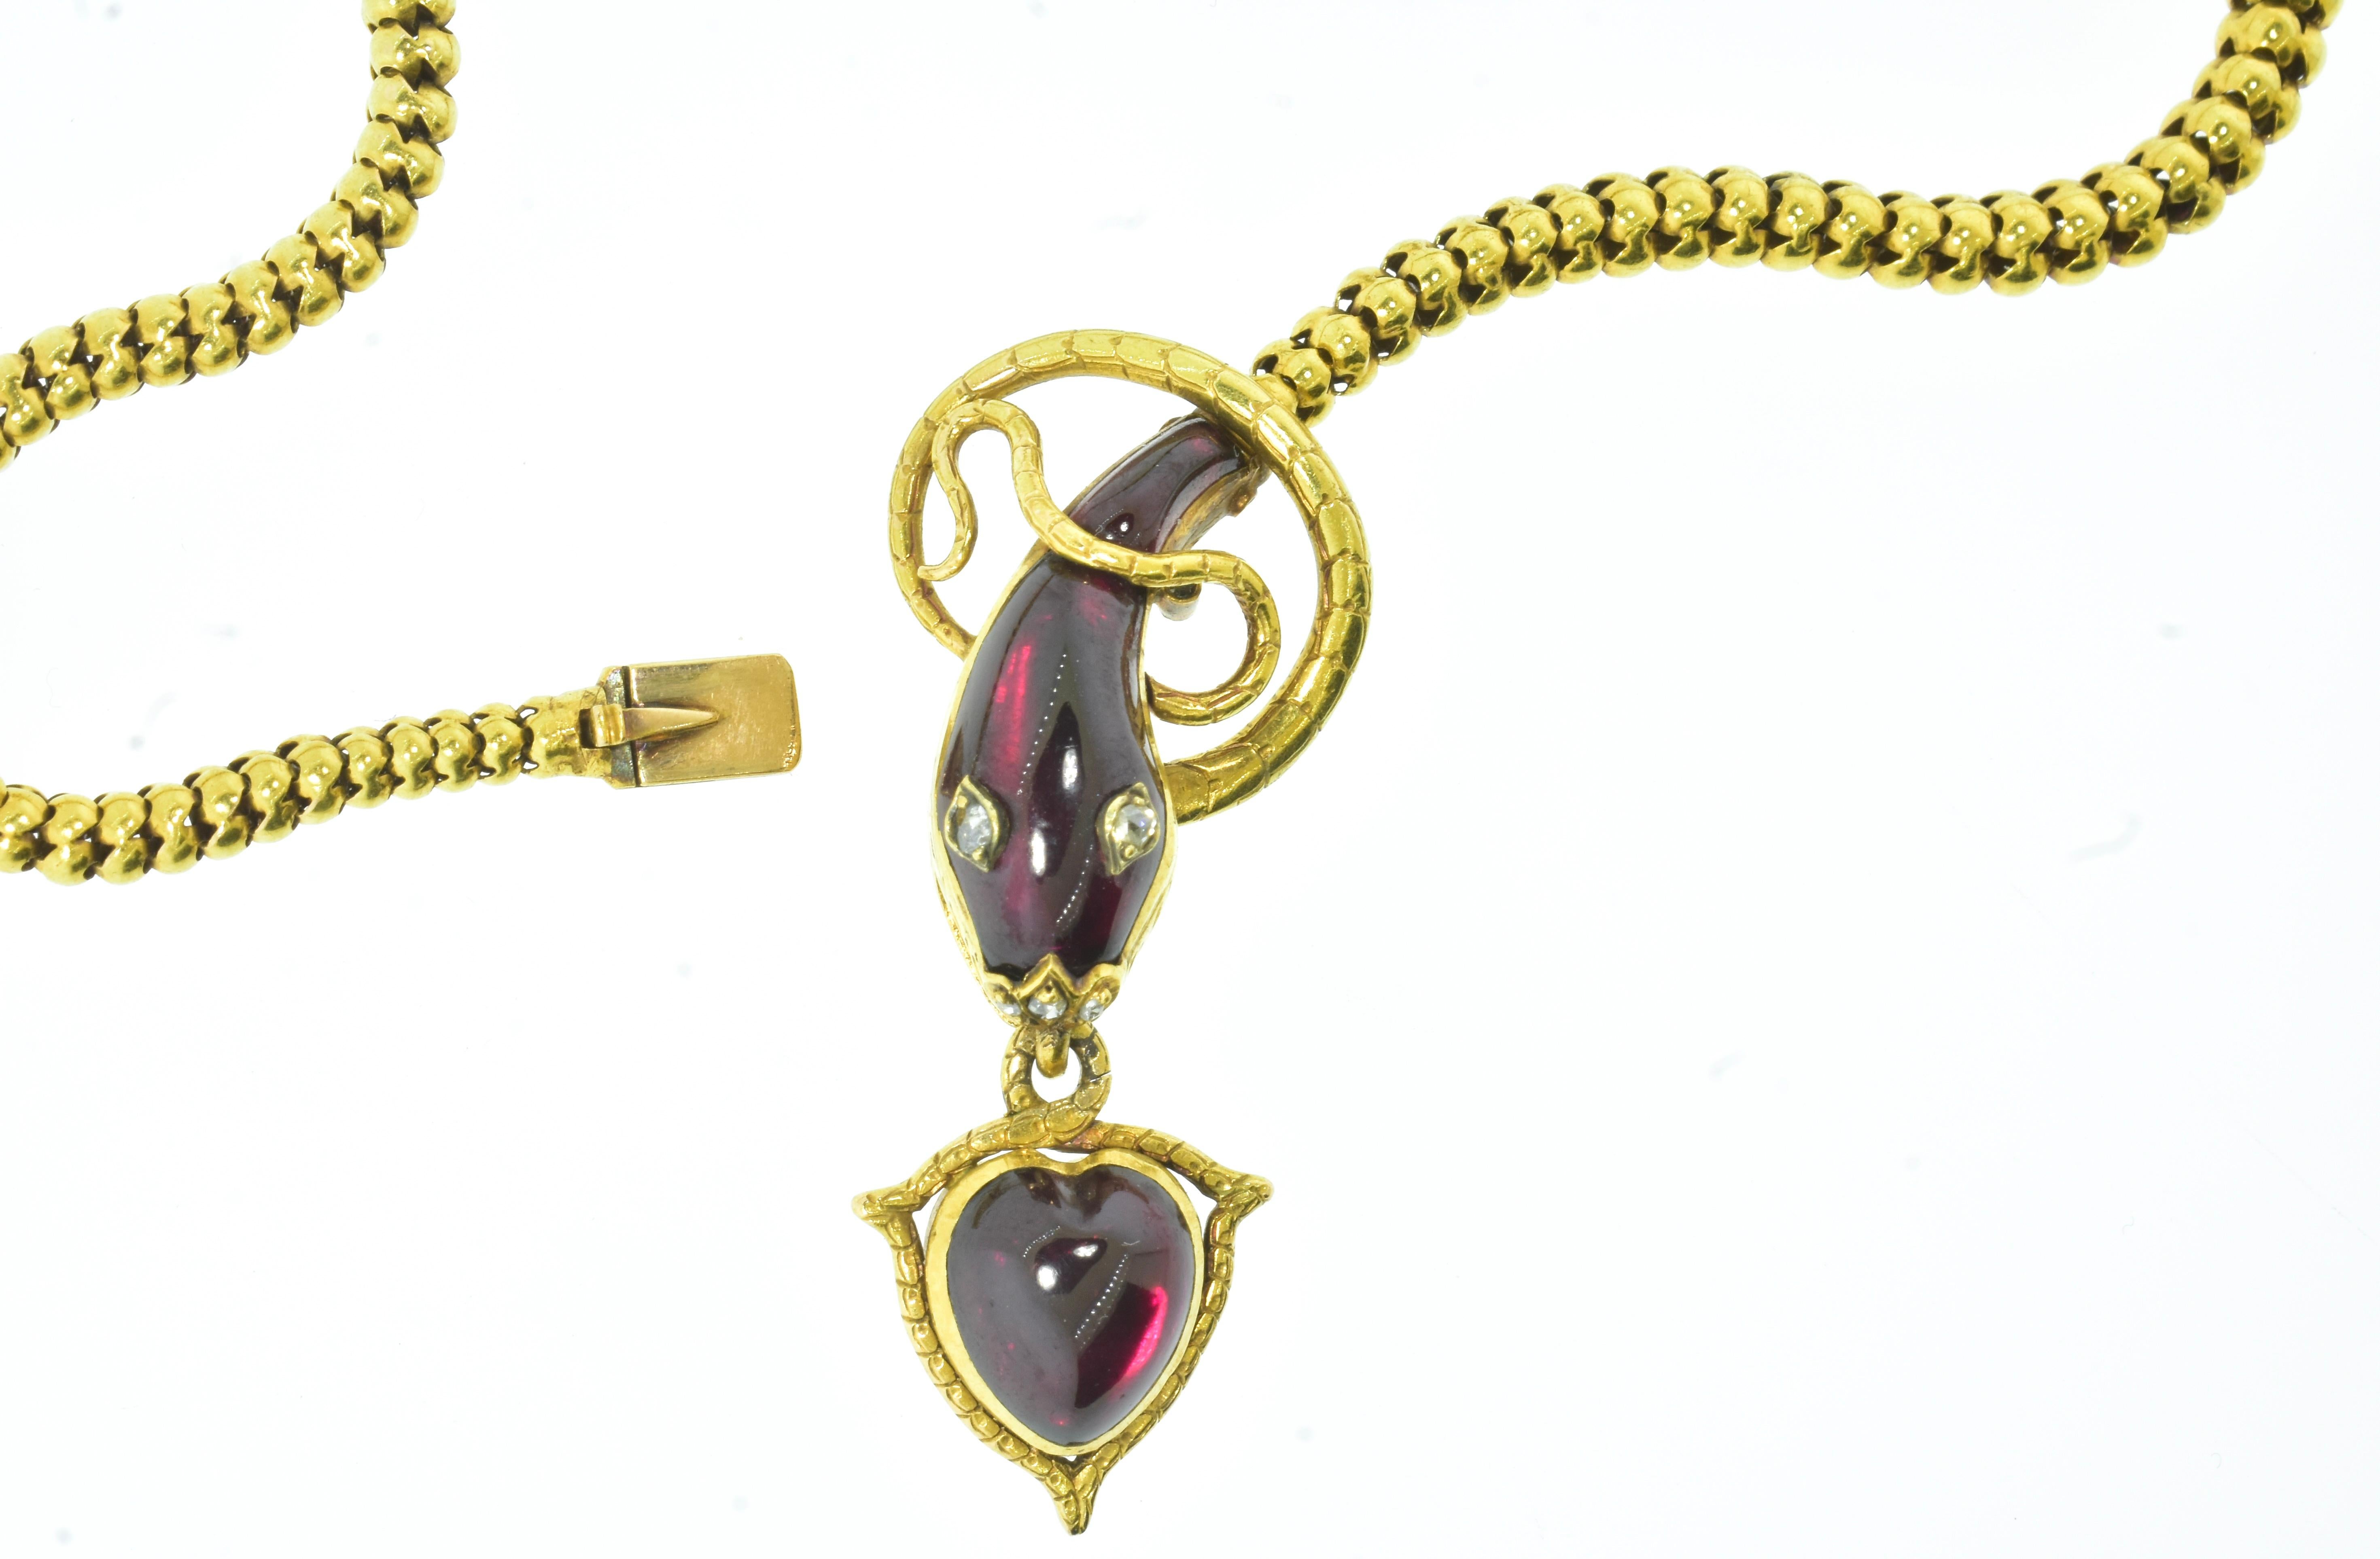 Antique Serpent & Heart Necklace with fancy cut Garnet & Diamond Eyes, c. 1870 In Excellent Condition For Sale In Aspen, CO